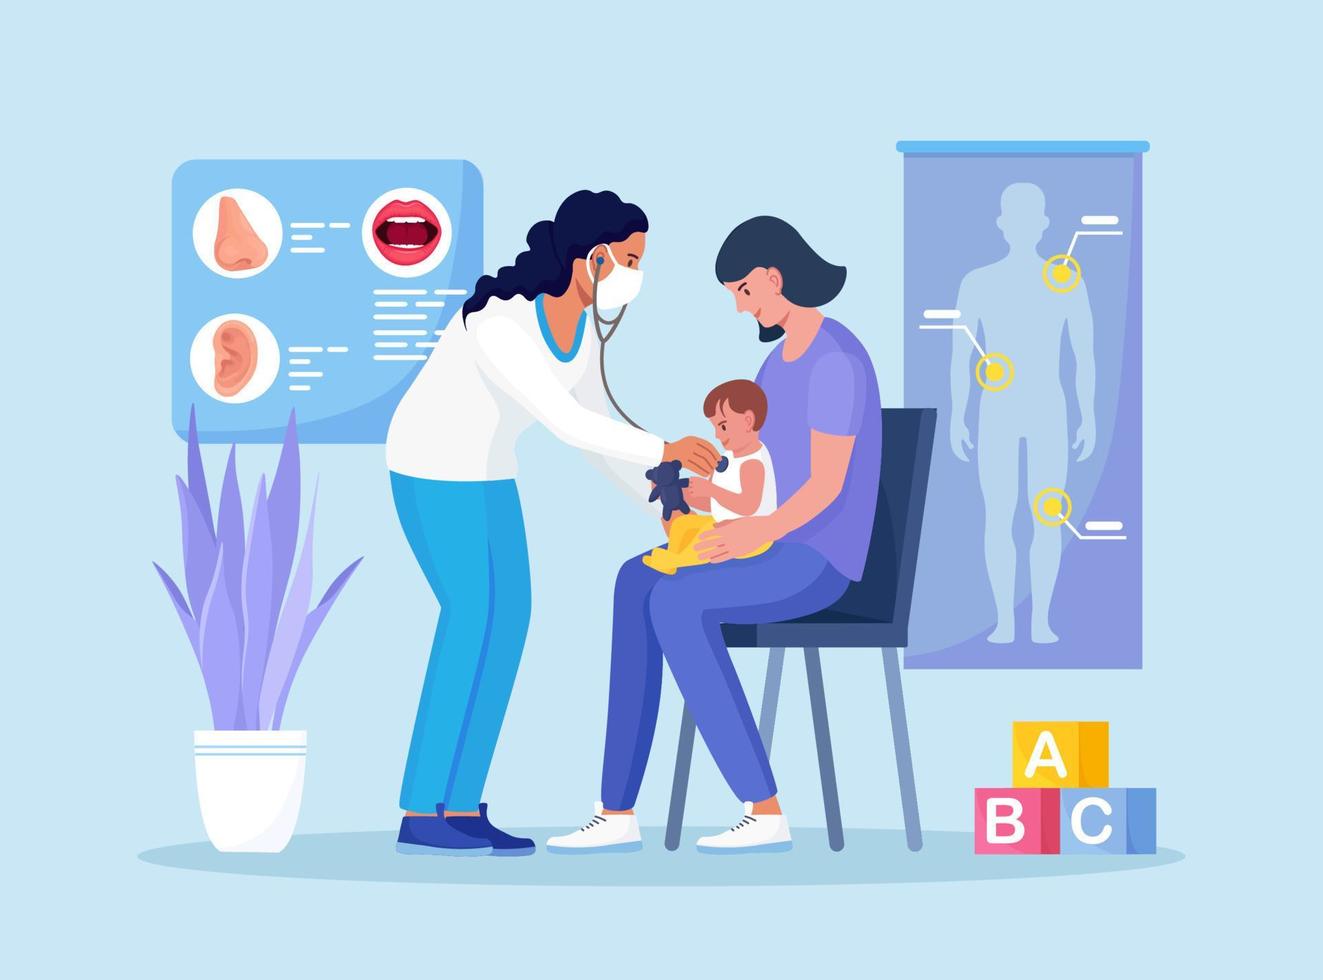 Checkup at children's doctor, neonatologist in hospital. Pediatrician examines sick kid with stethoscope. Child with mom at pediatrician office. Healthcare, child care, medical check up vector